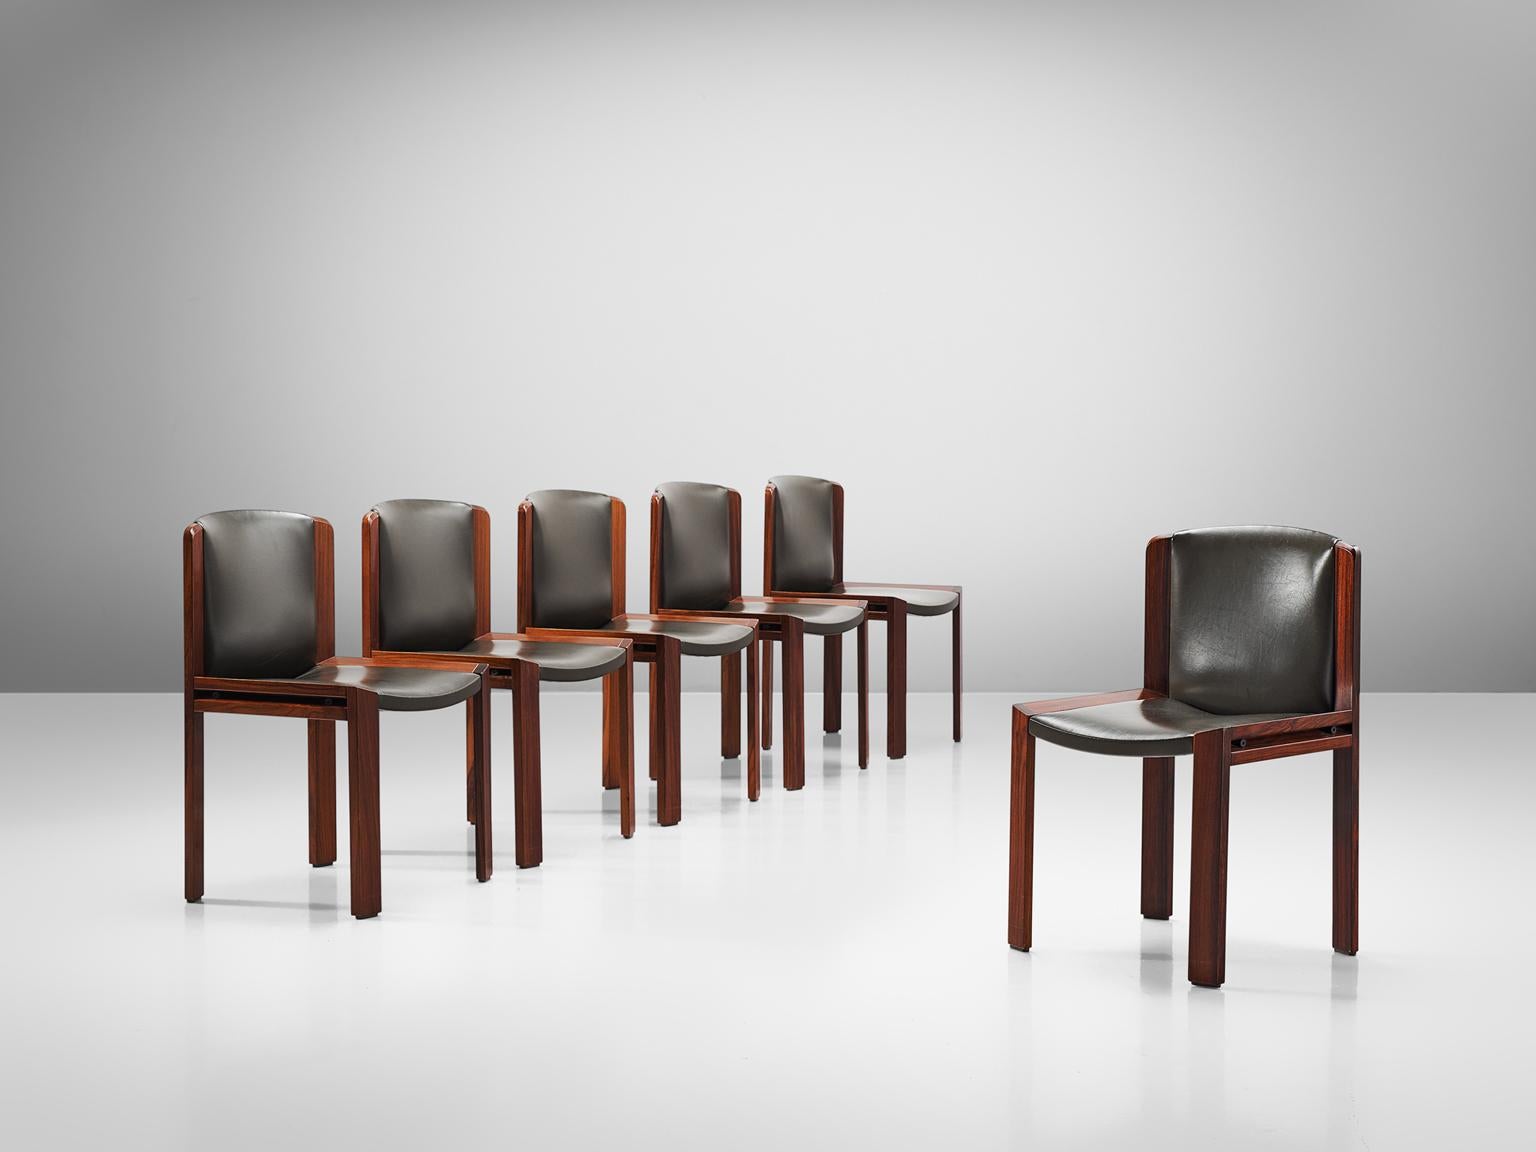 Joe Colombo for Pozzi, set of 6 dining chairs model '300', leather and stained oak, Italy, 1966.

Functionalist set of dining chairs is designed by Joe Colombo in 1966. His fascination with functionality meant he always focused on the user, which